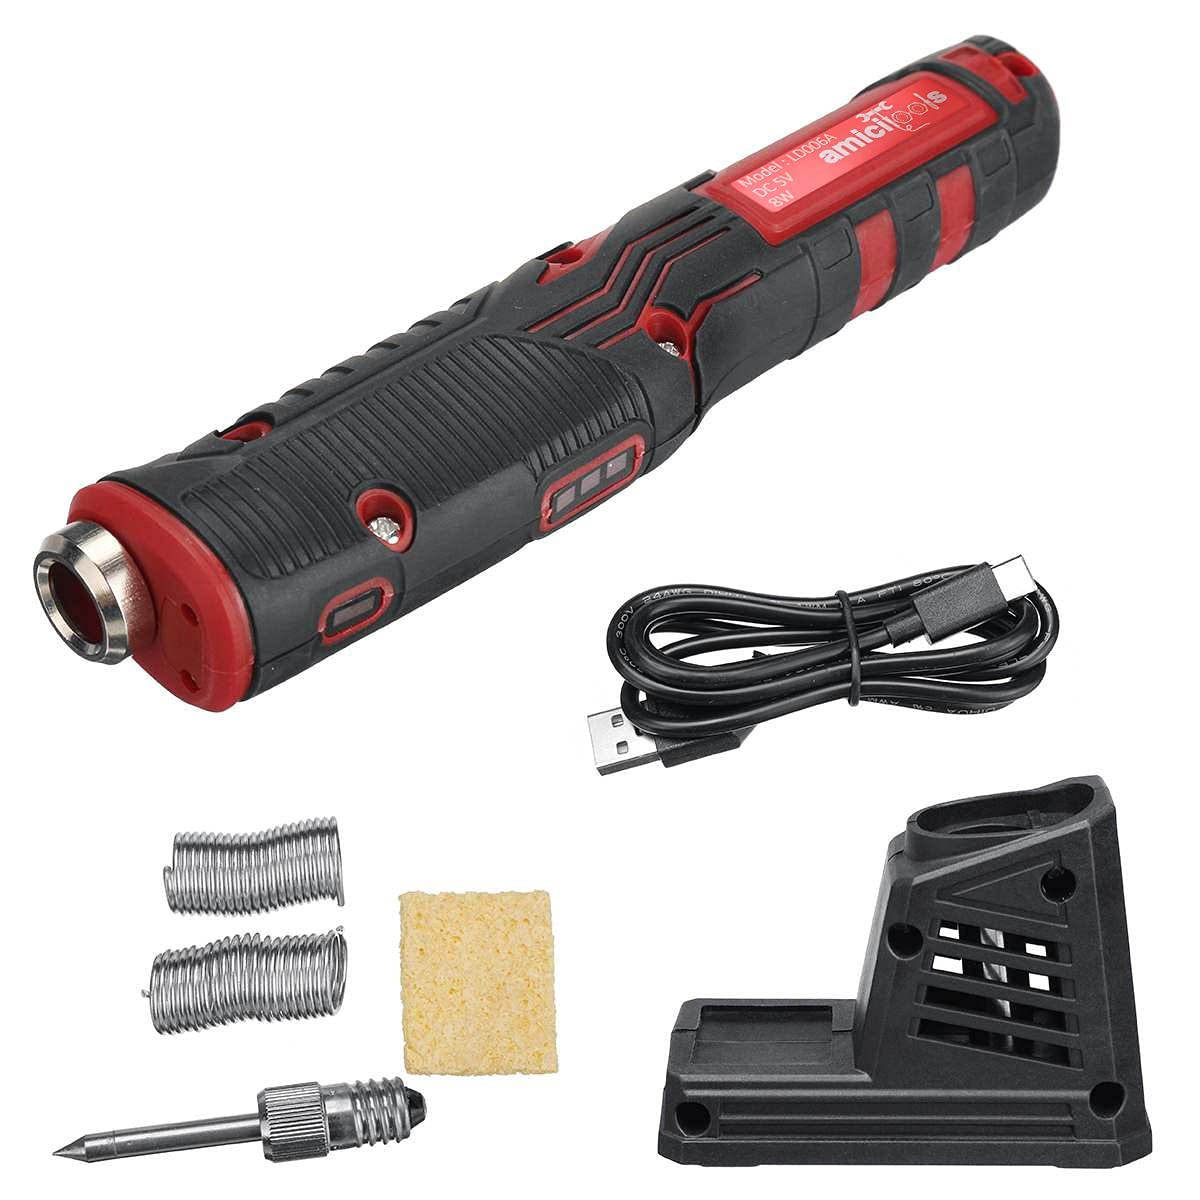 5V Cordless Soldering Iron ( Red Color )